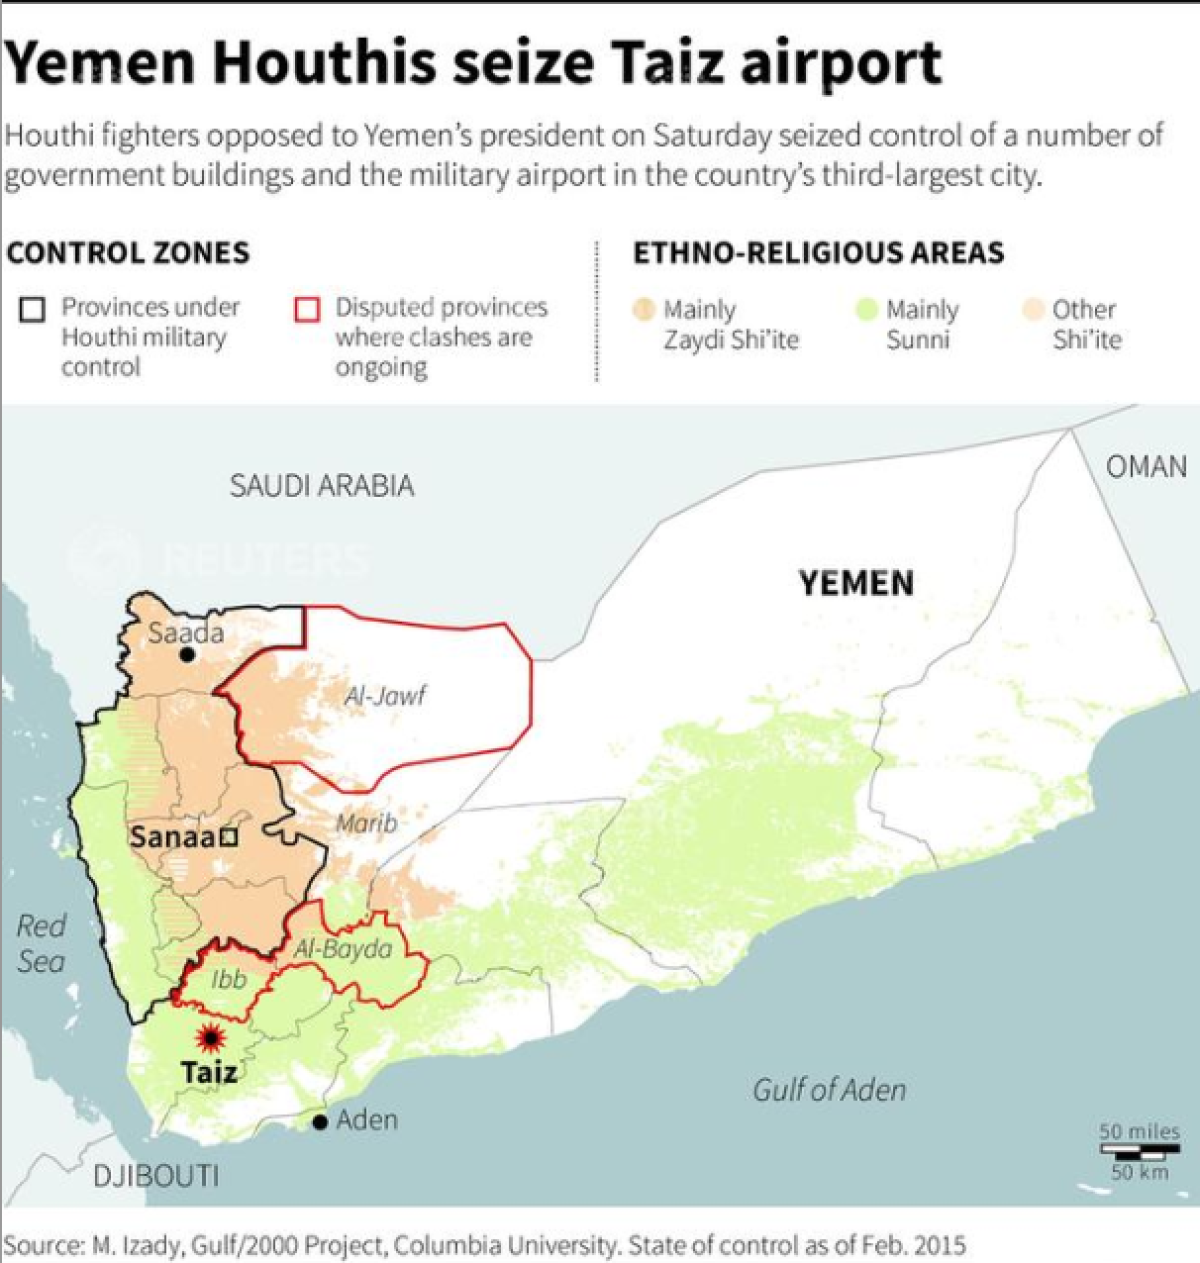 Map of Yemen showing control zones and ethno-religious areas, locating city of Taiz where Houthi fighters seized the military airport from local authorities on Saturday.